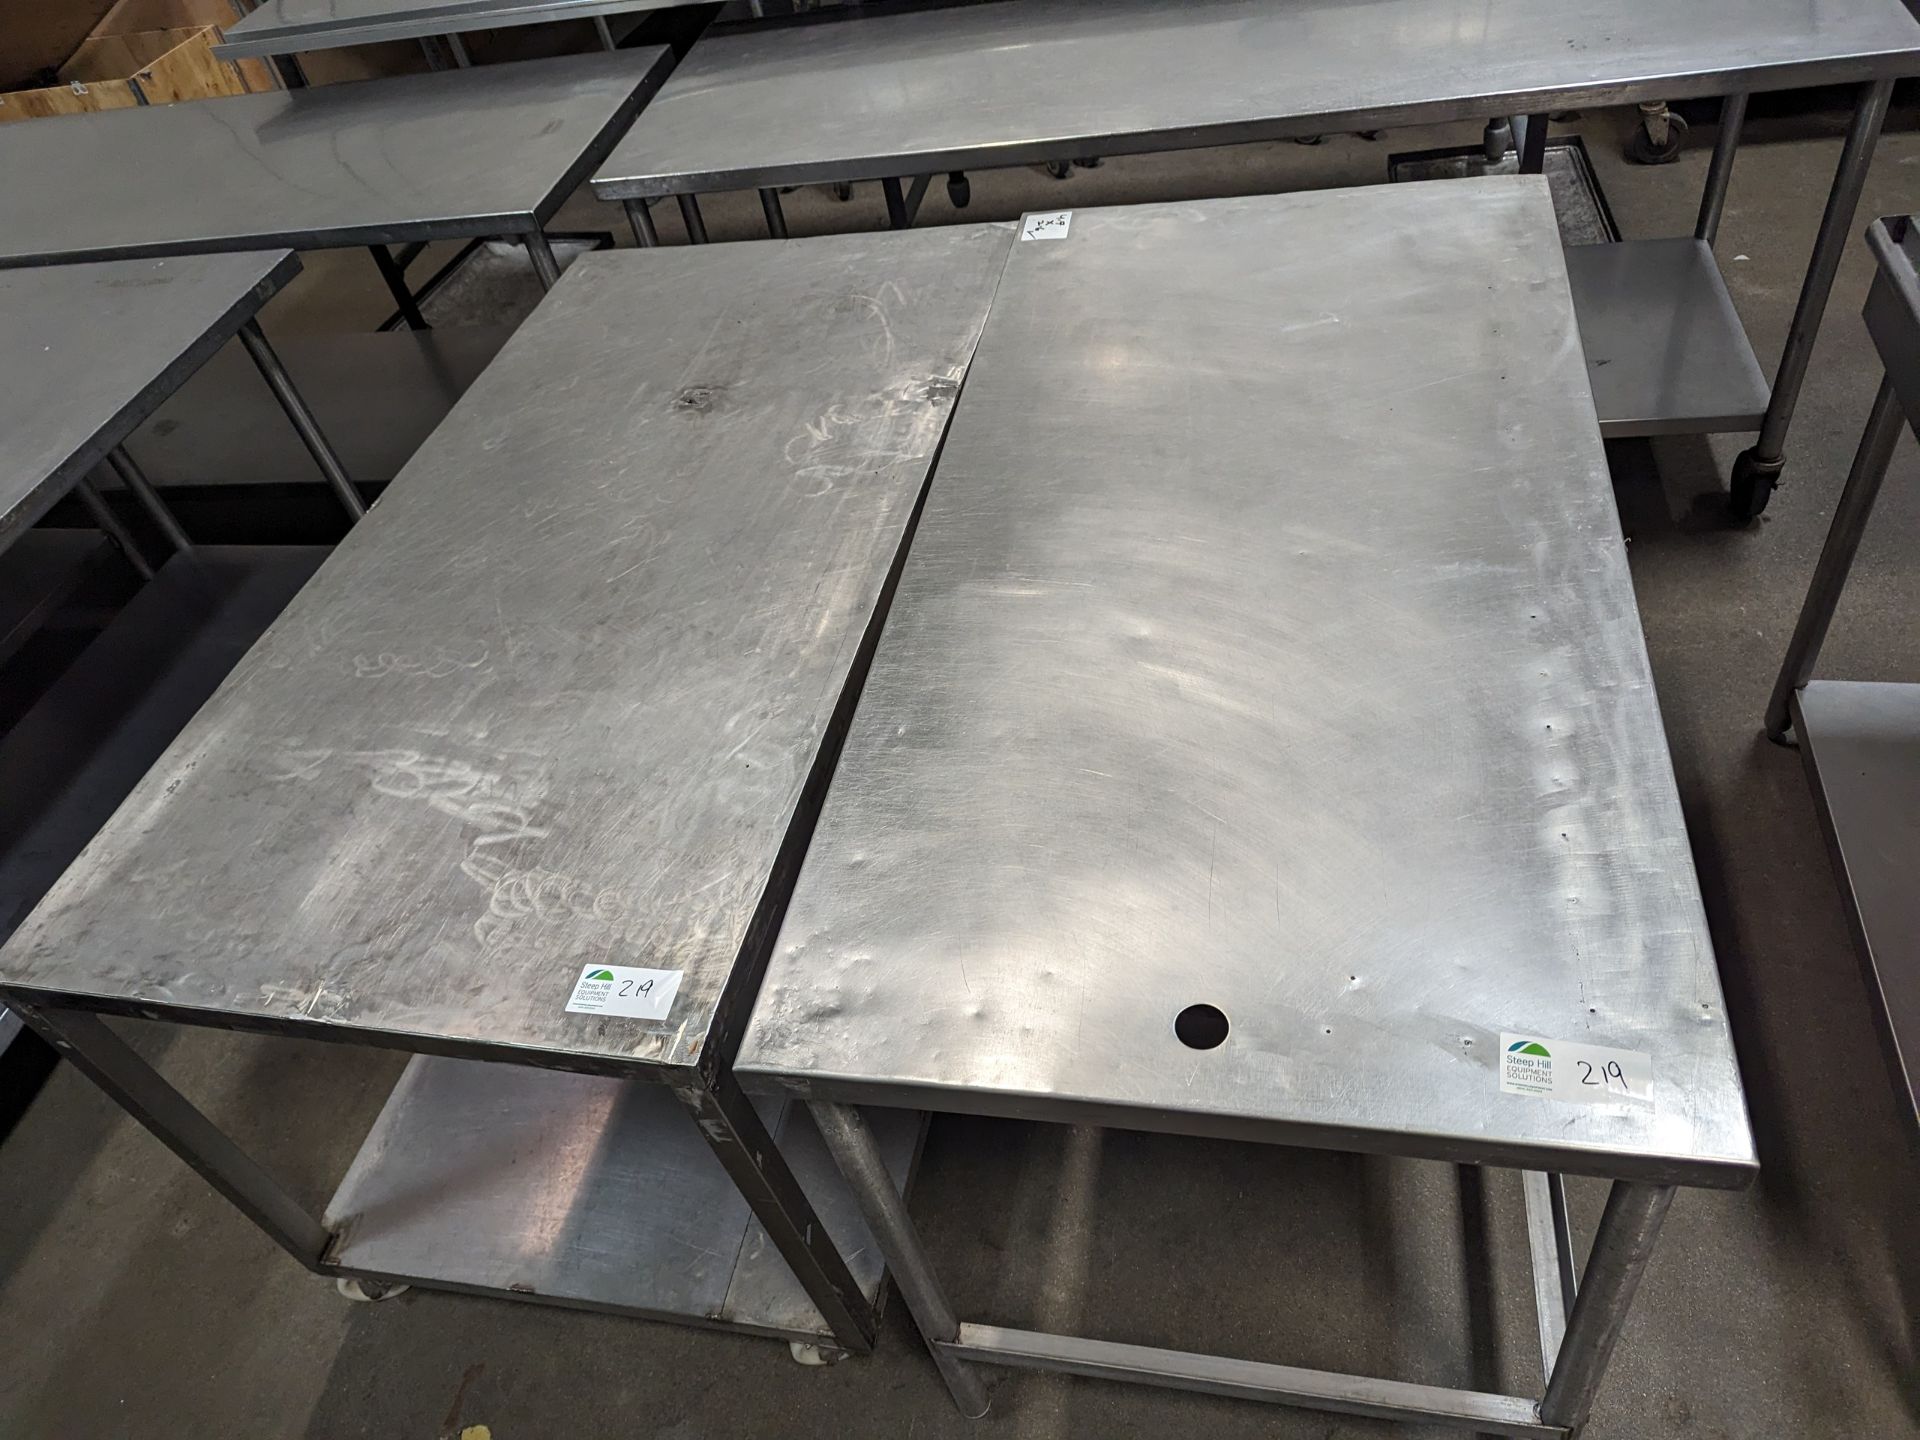 Lot of 2 5ft Long SS Tables, Dimensions LxWxH: 60x32x34 each